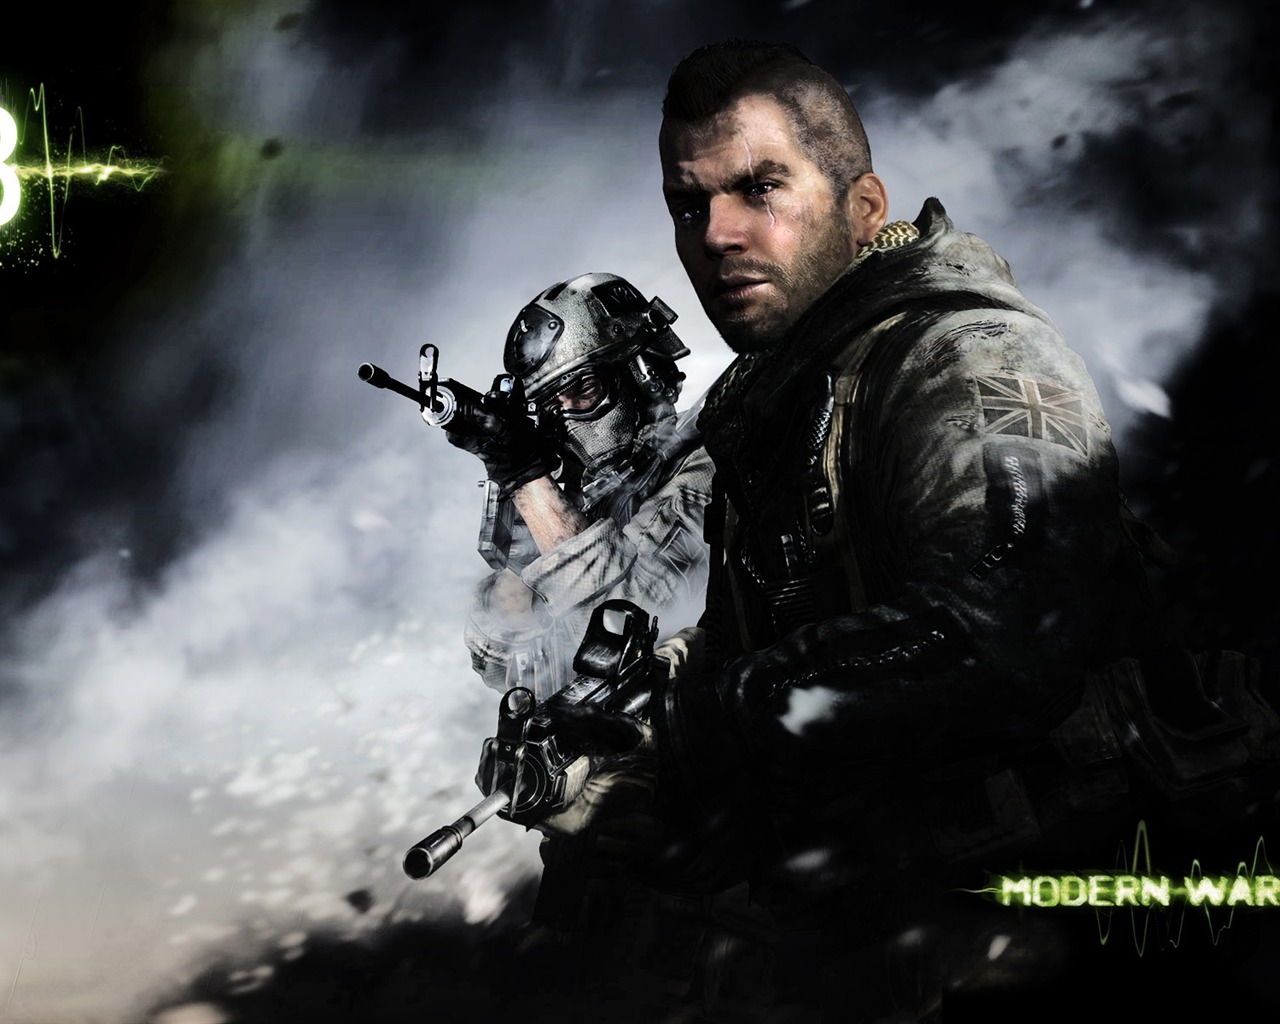 Call of Duty: MW3 HD wallpapers #13 - 1280x1024